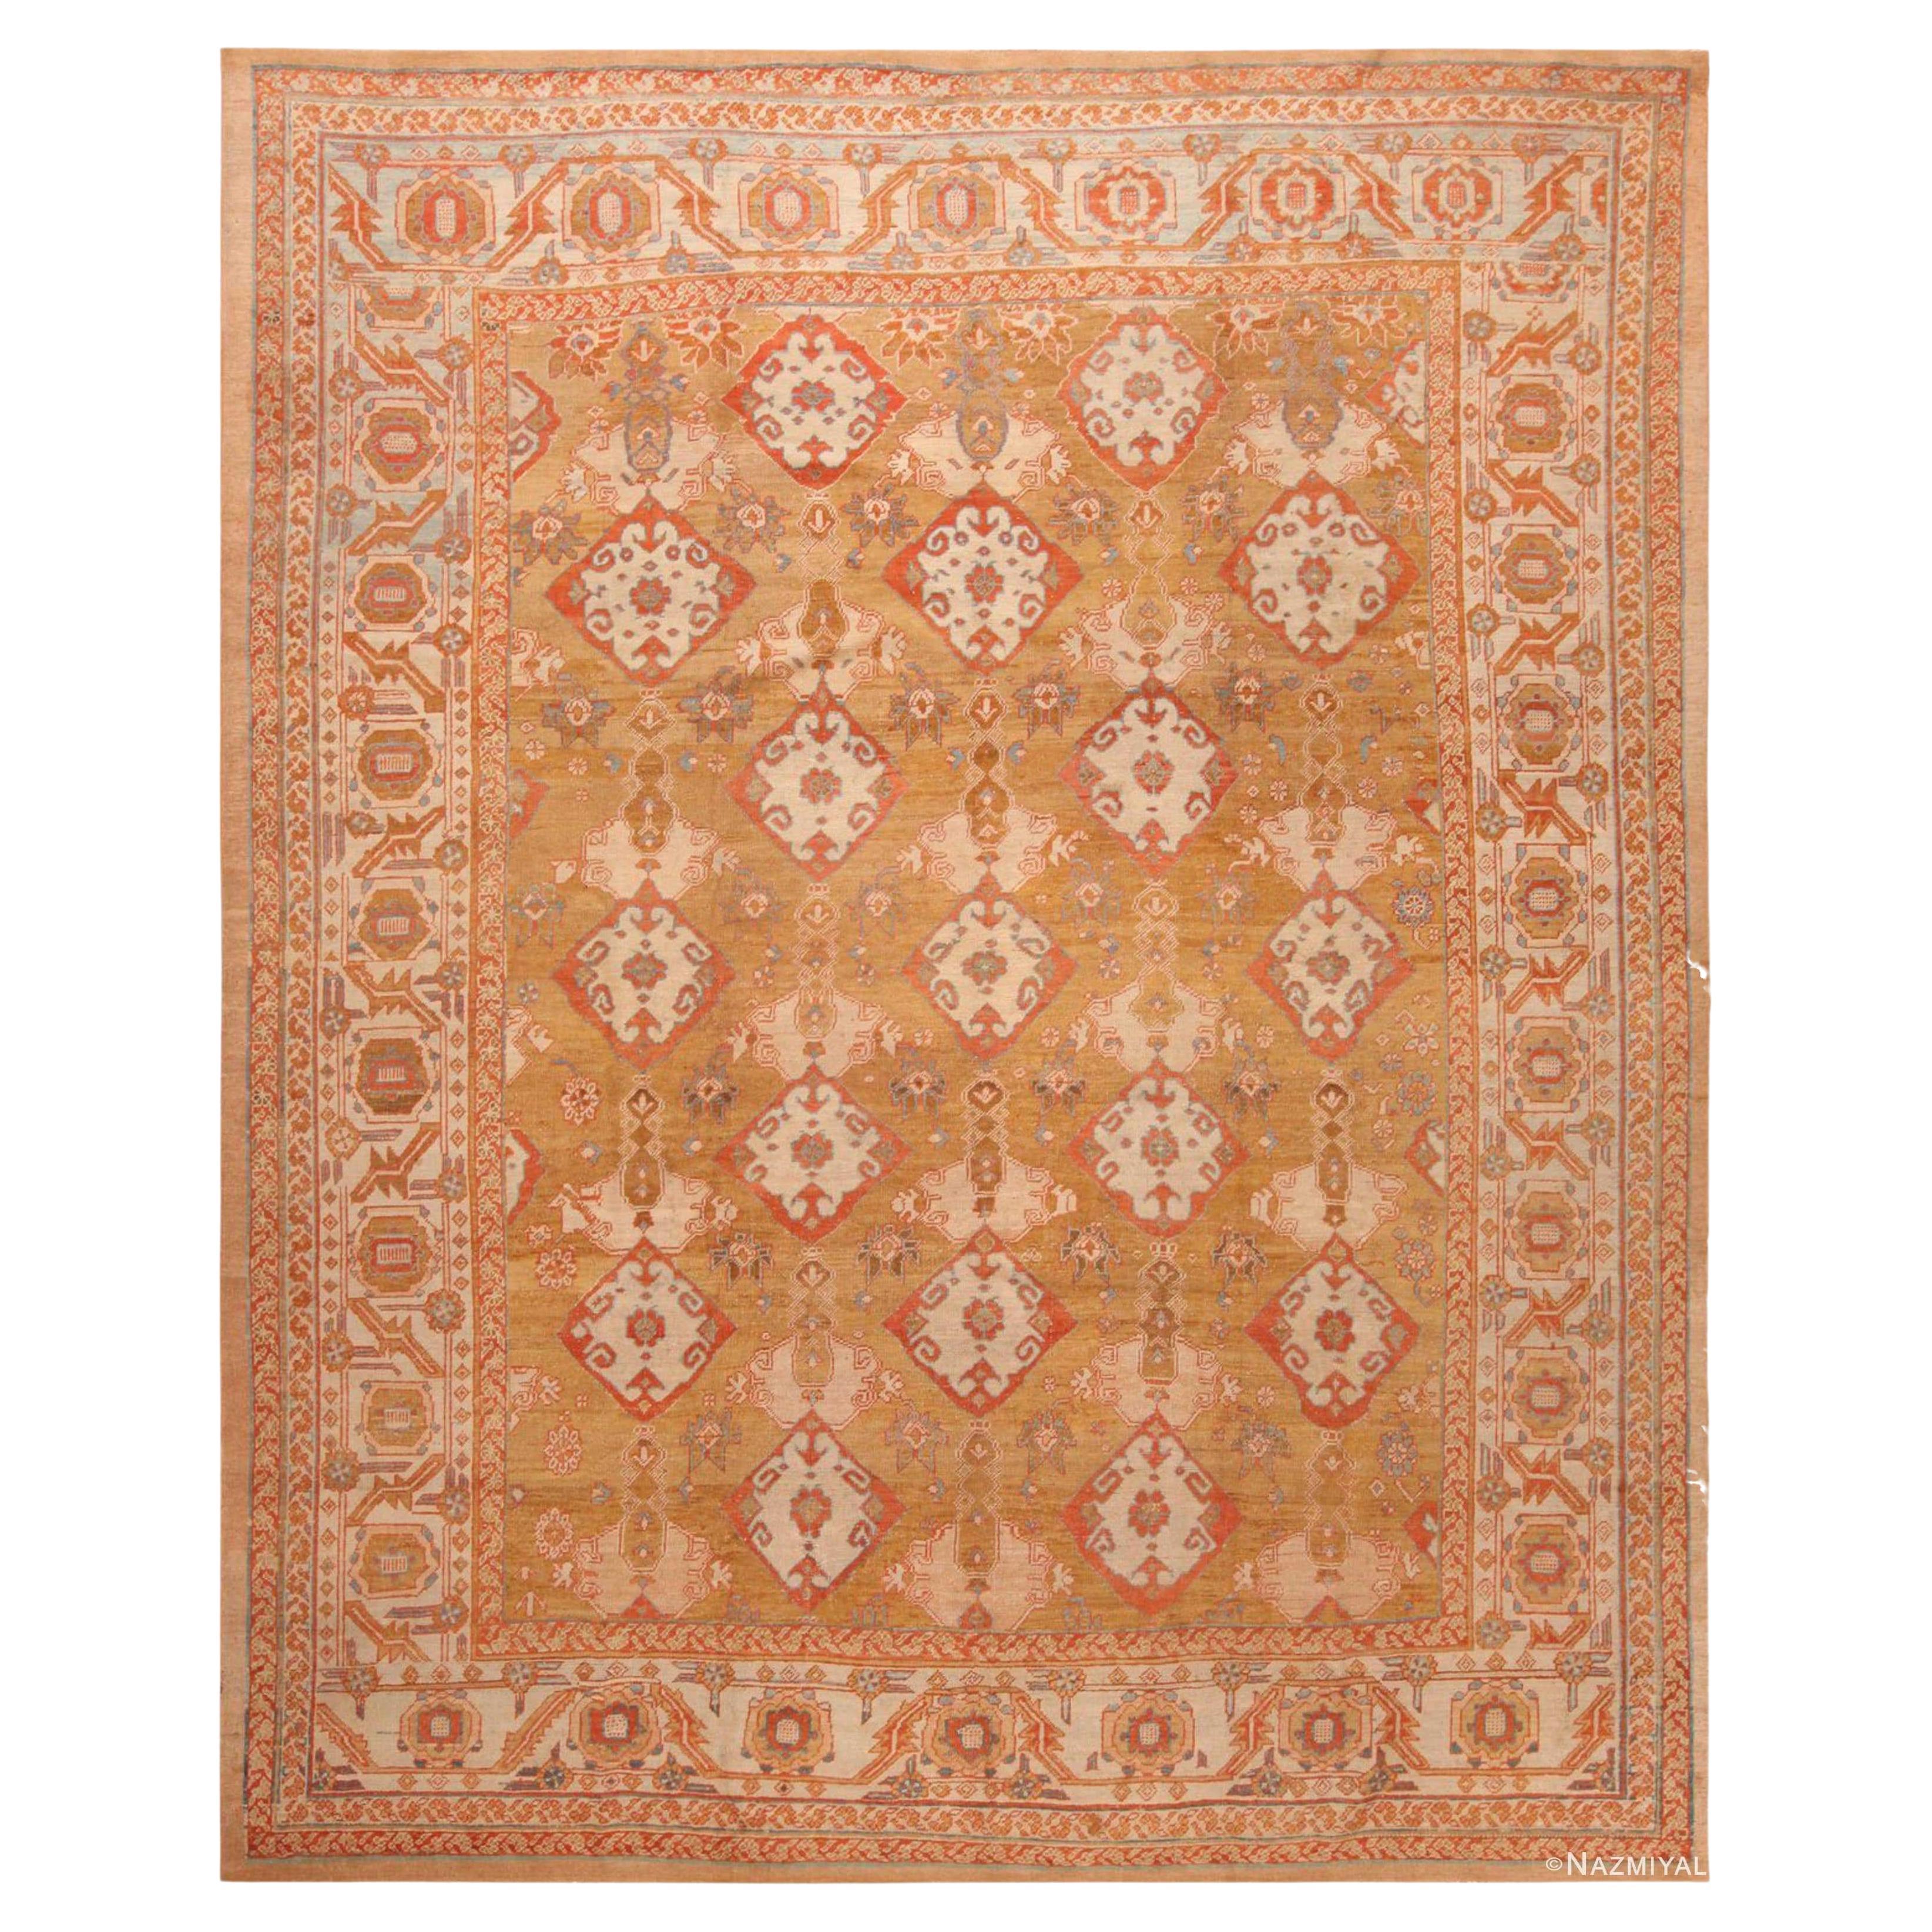 Nazmiyal Collection Antique Persian Bakshaish Rug. 10 ft 10 in x 13 ft 4 in